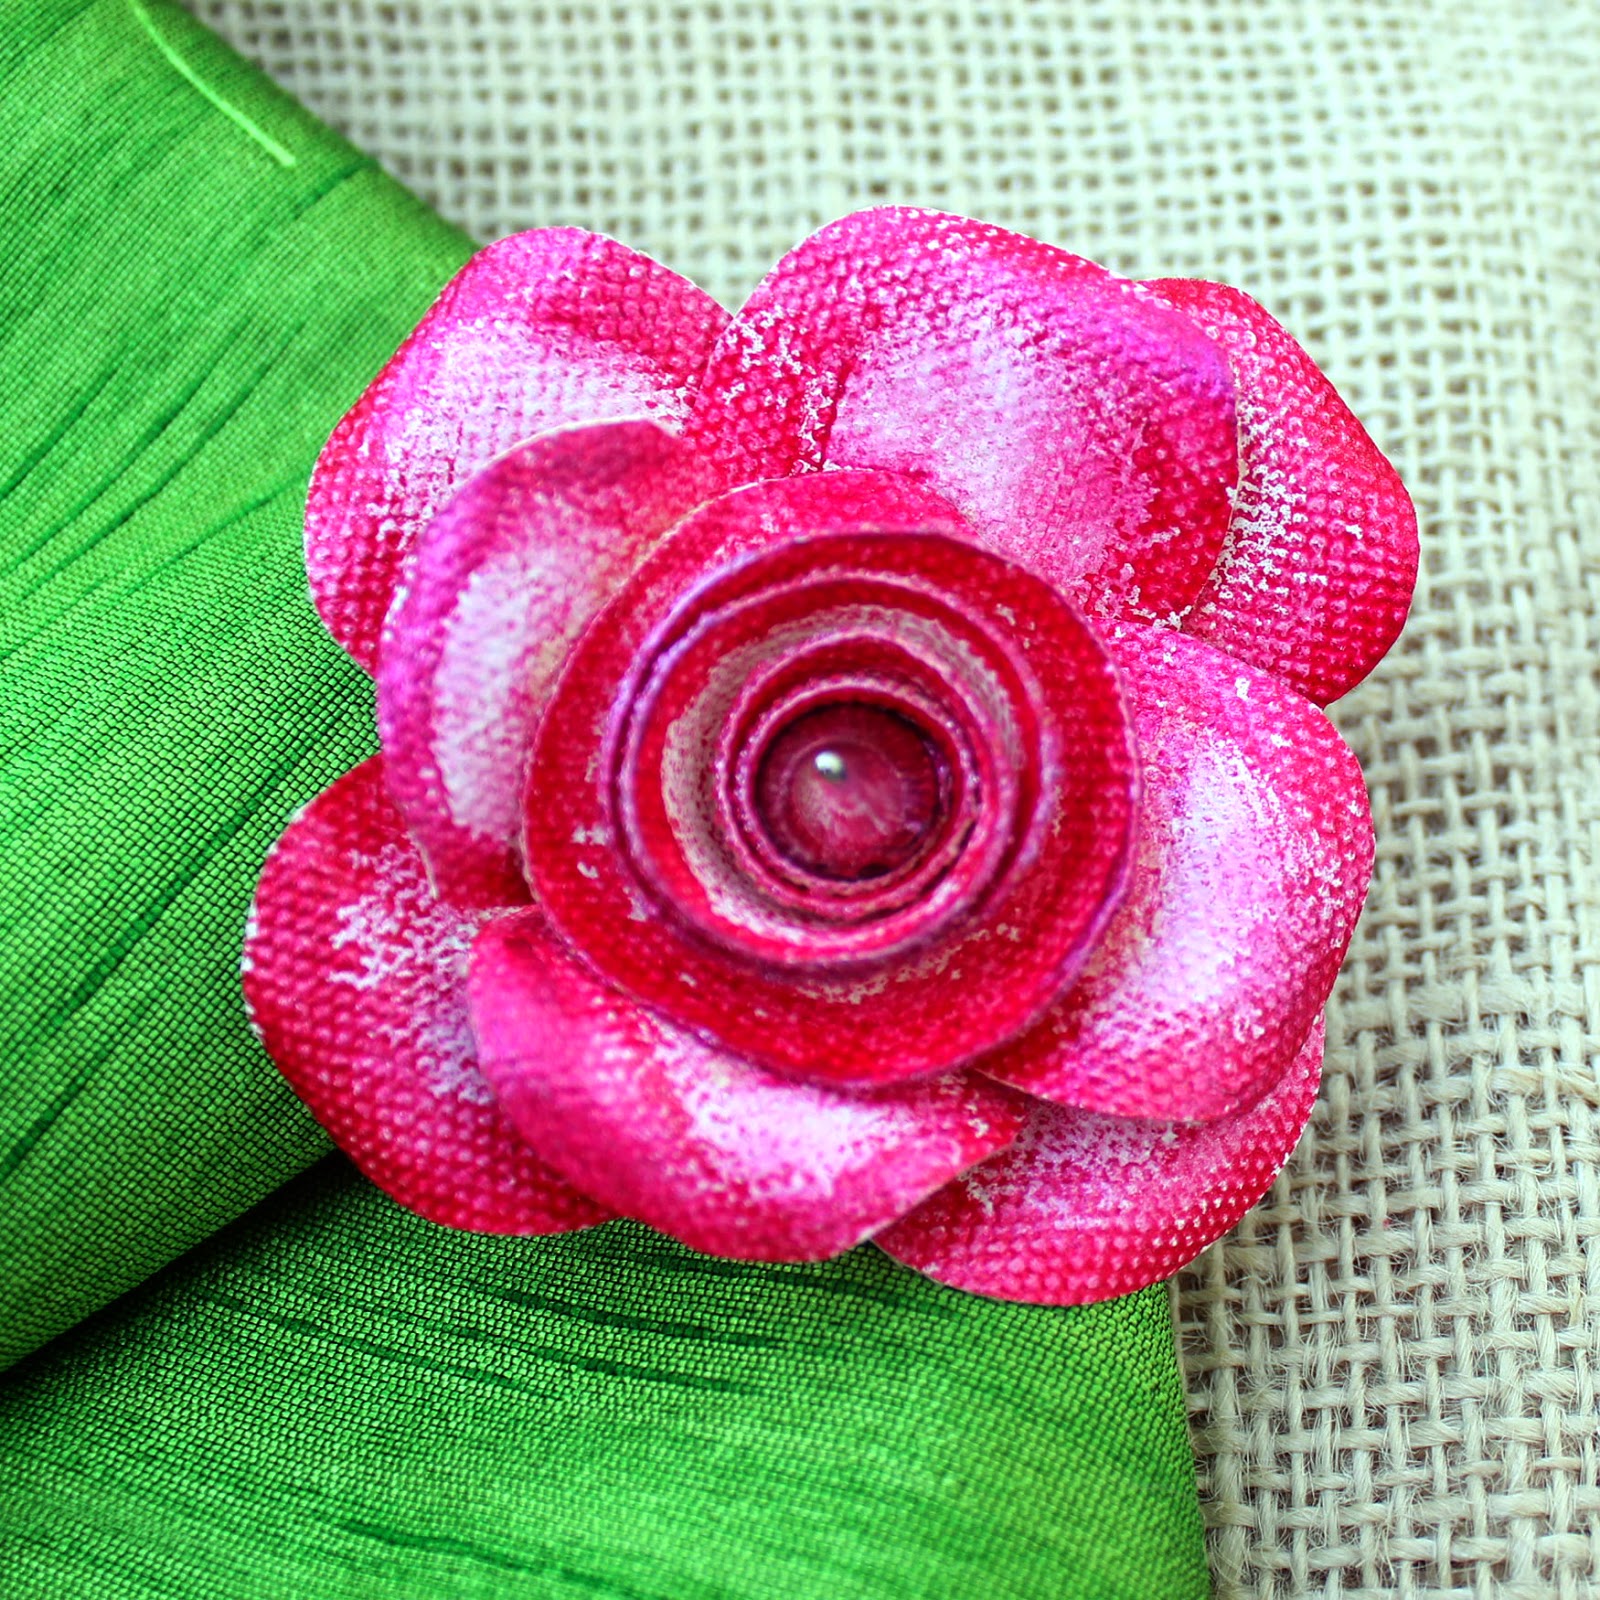 How to Make a Rose Brooch